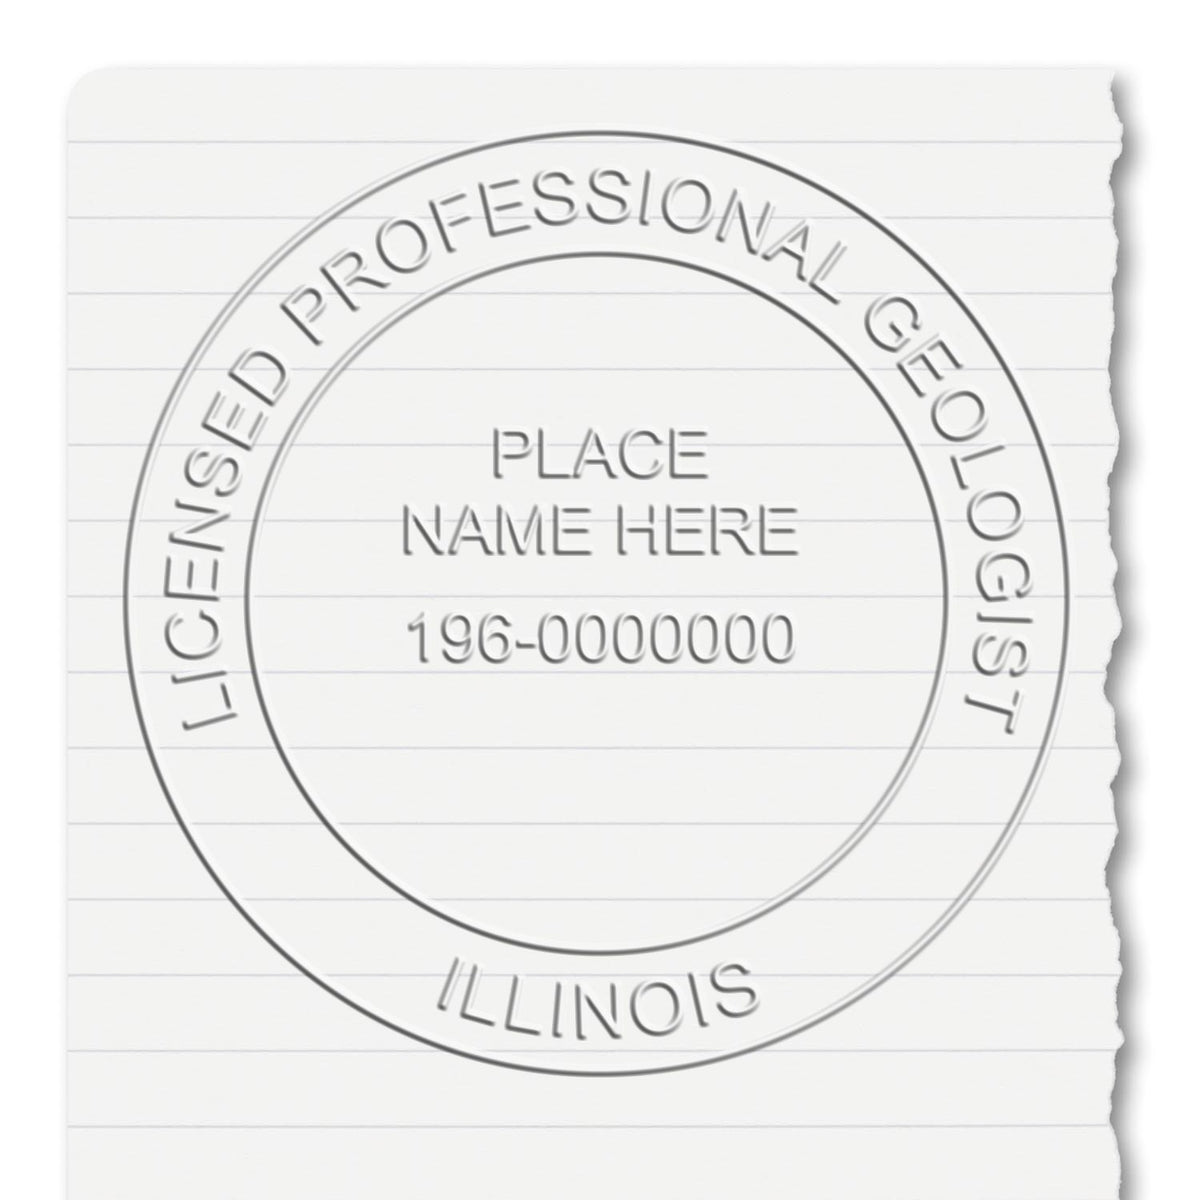 An in use photo of the Soft Illinois Professional Geologist Seal showing a sample imprint on a cardstock